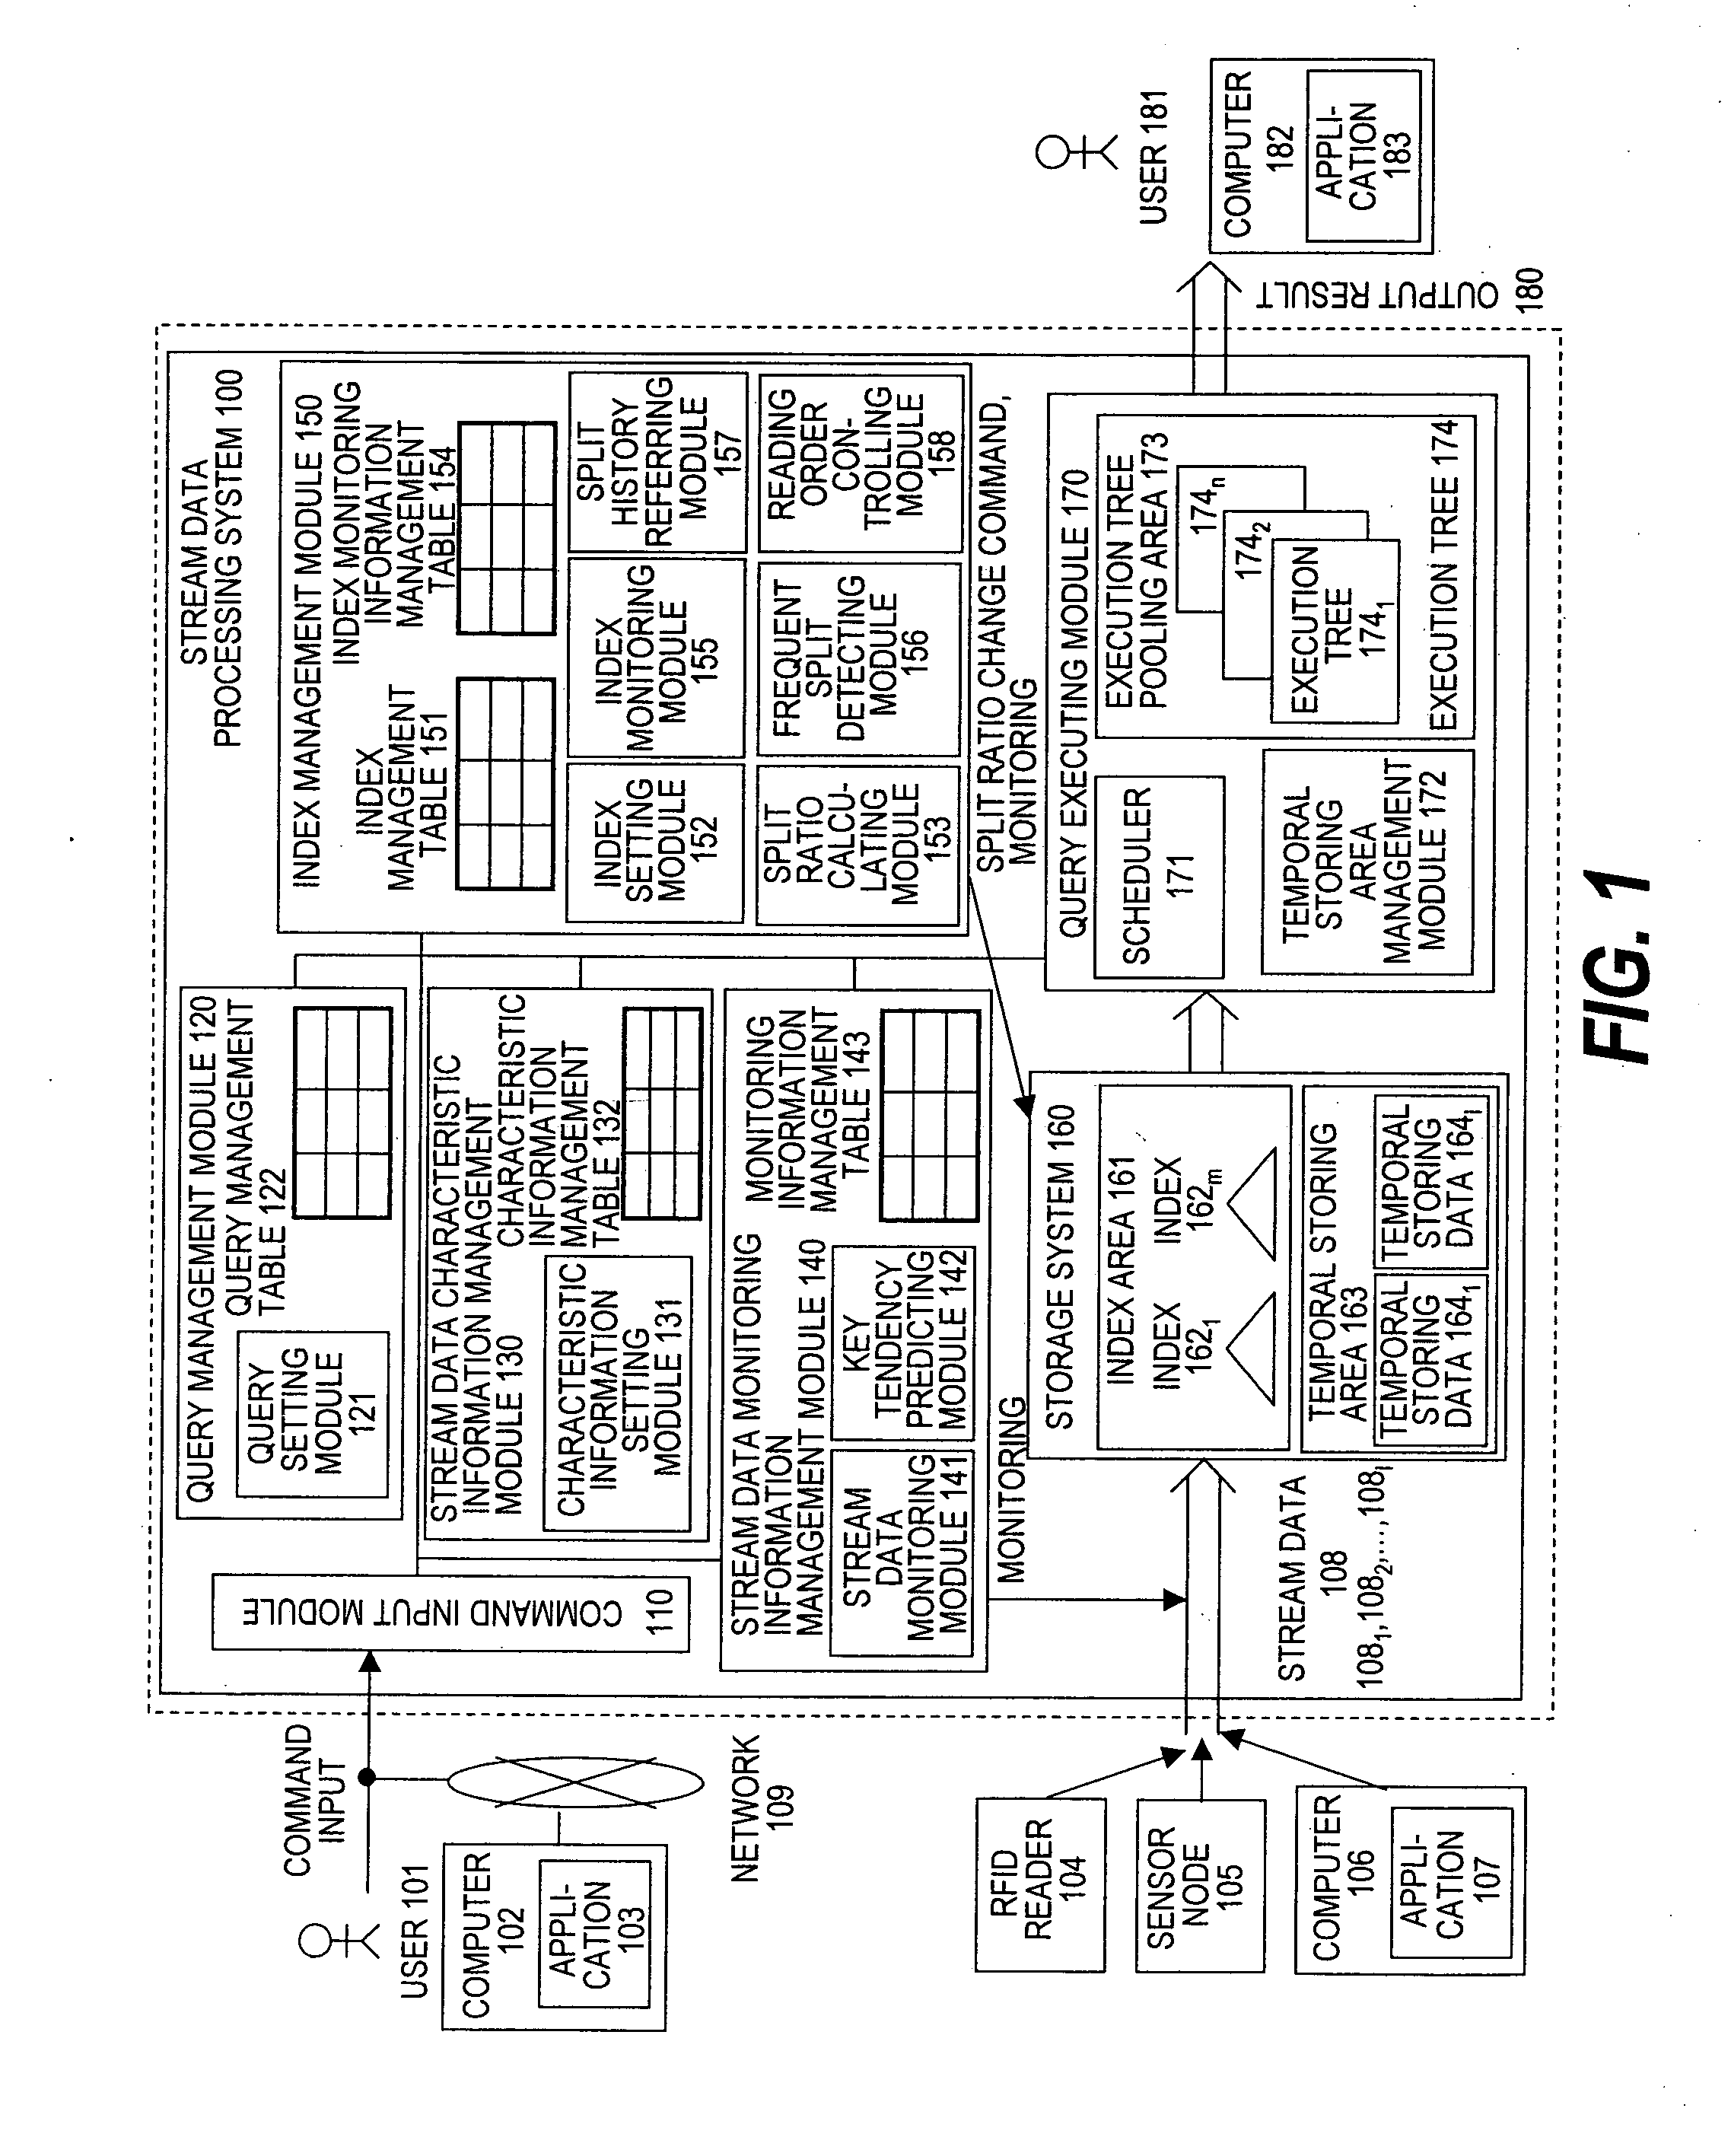 Index processing method and computer systems